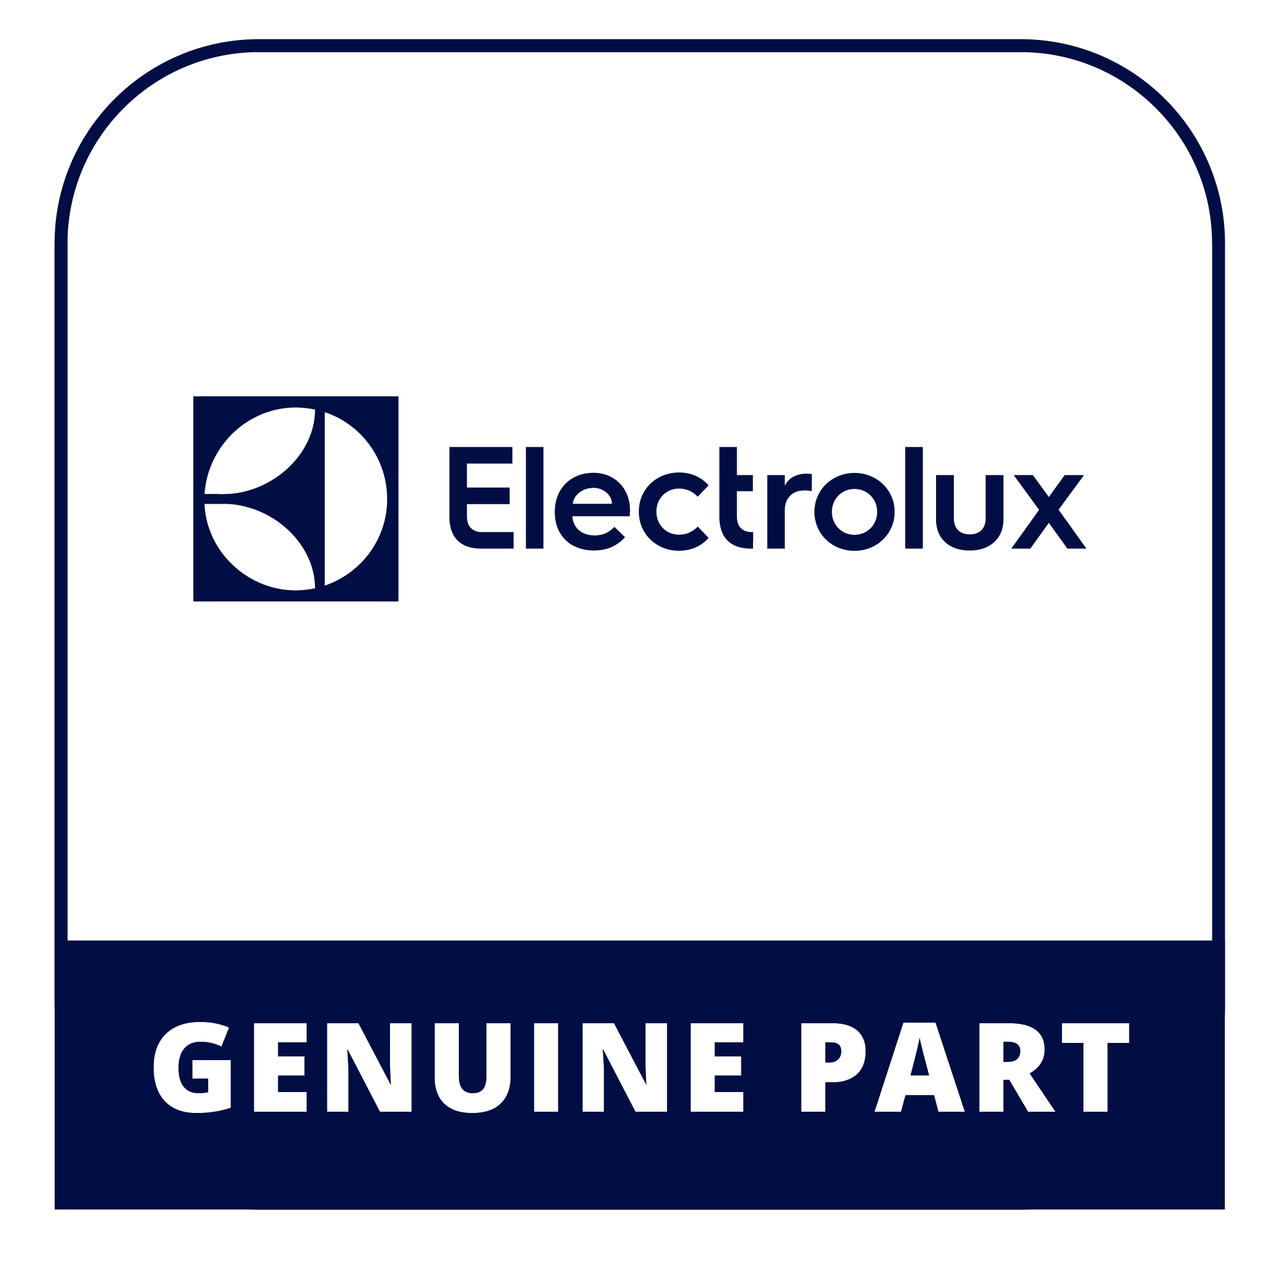 Frigidaire - Electrolux 318205219 Owners Manual - Genuine Electrolux Part